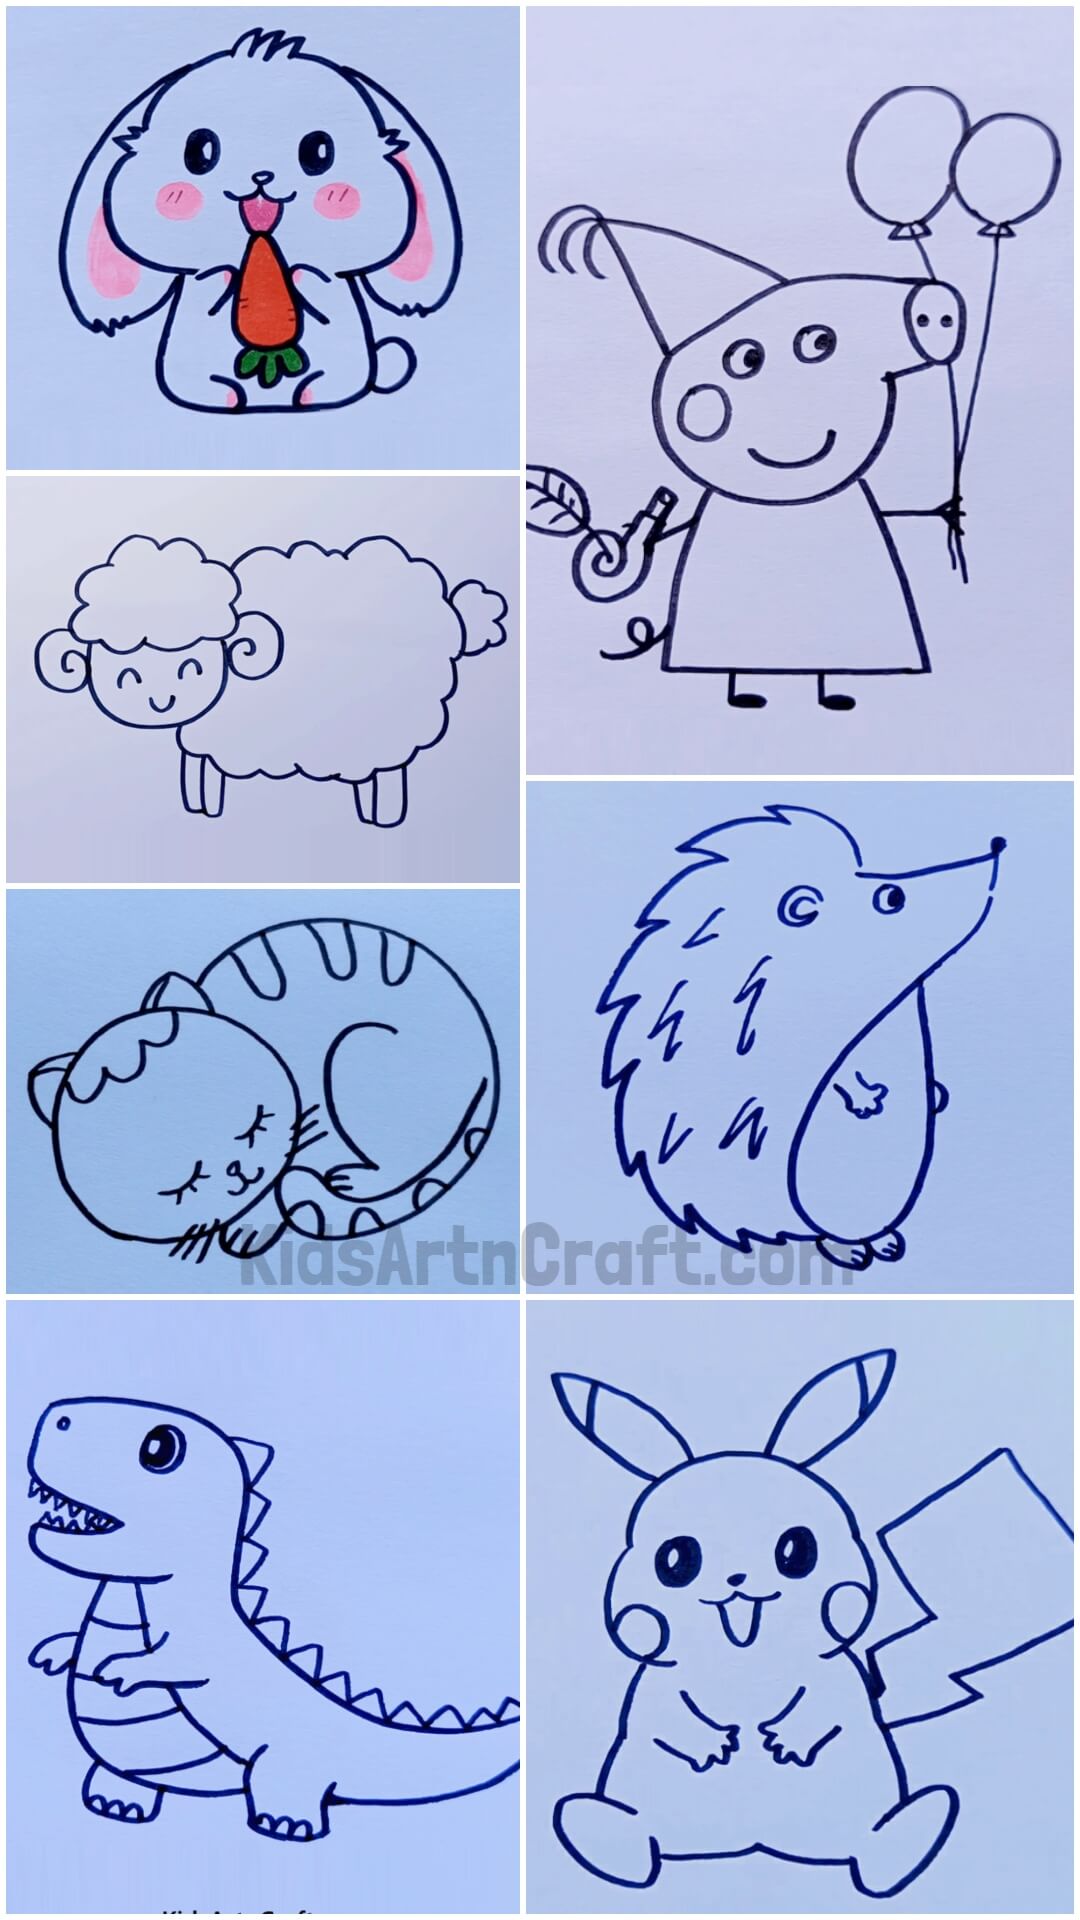 Easy Animal Drawings For Kids And Beginners